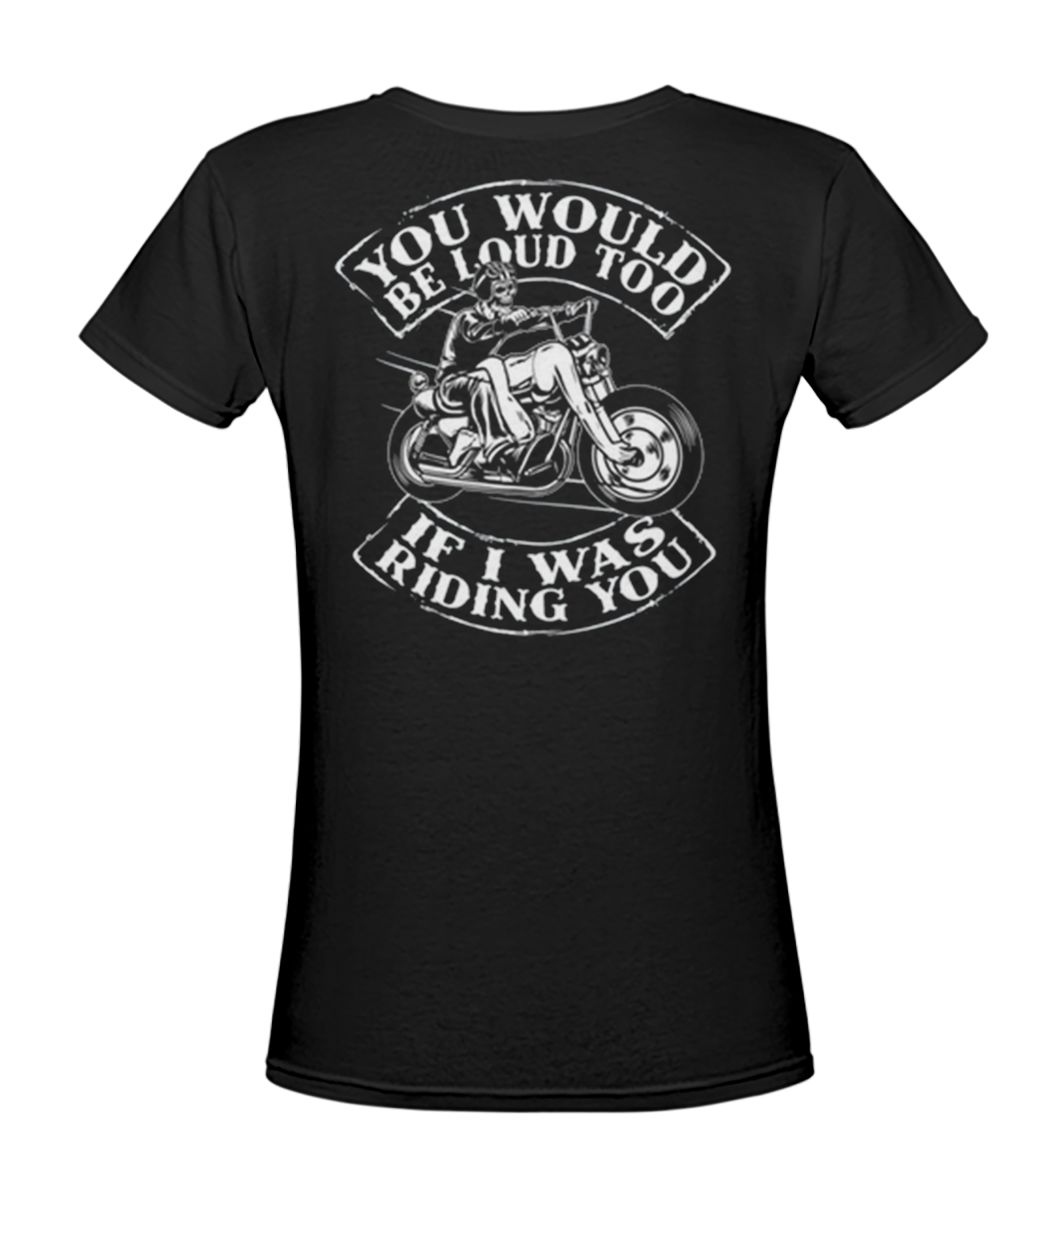 You would be loud too if I was riding you women's v-neck